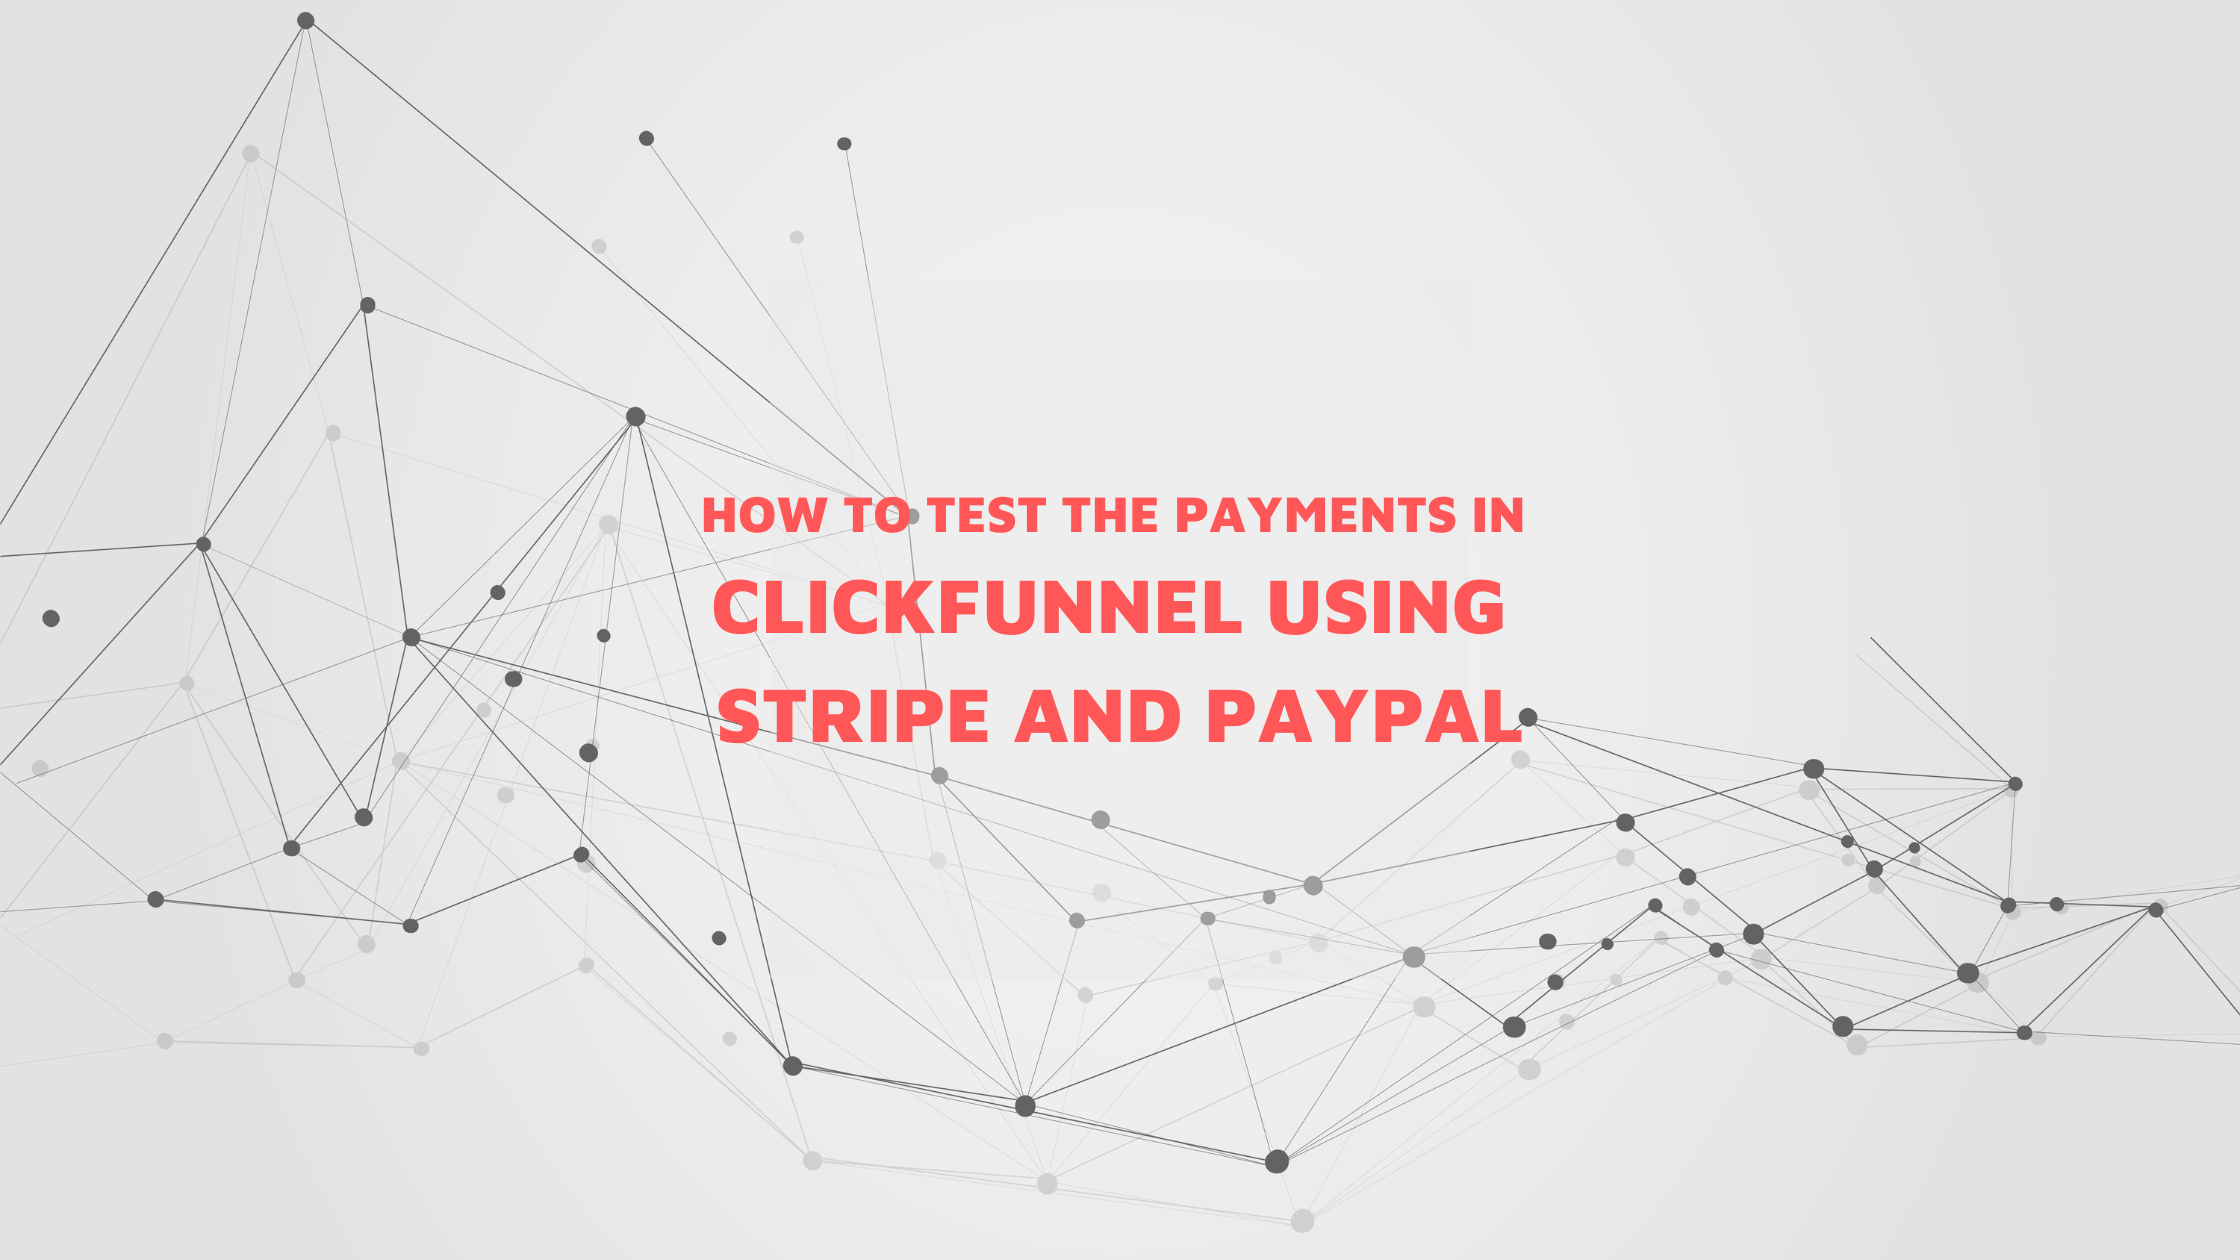 How to Test the Payments in ClickFunnel Using Stripe and Paypal